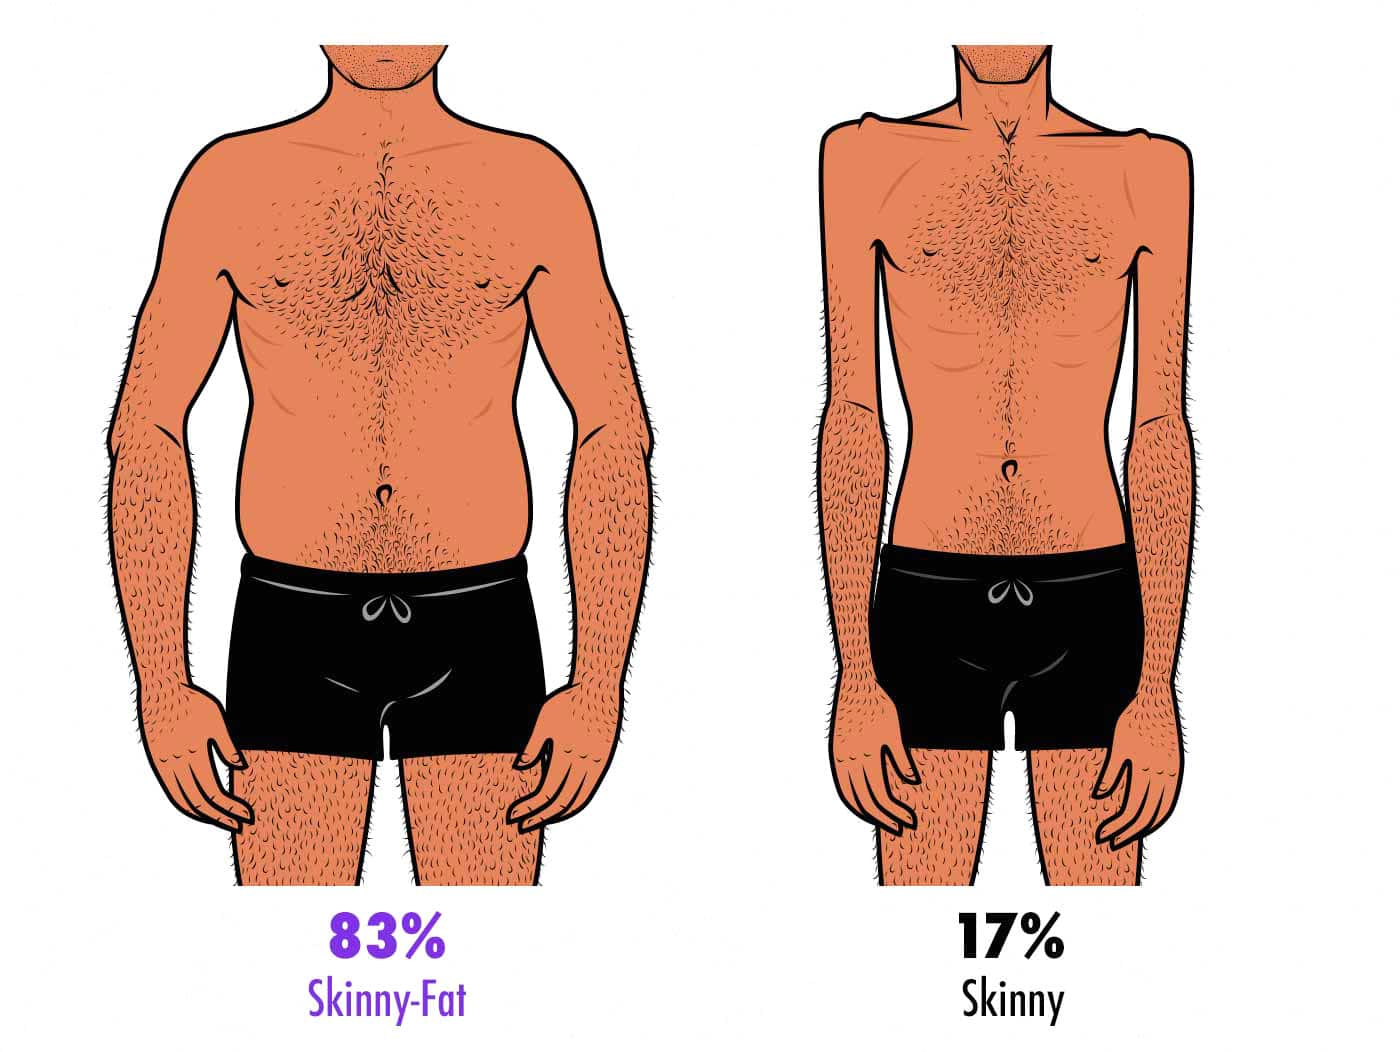 Illustration comparing skinny and skinny-fat bodies.